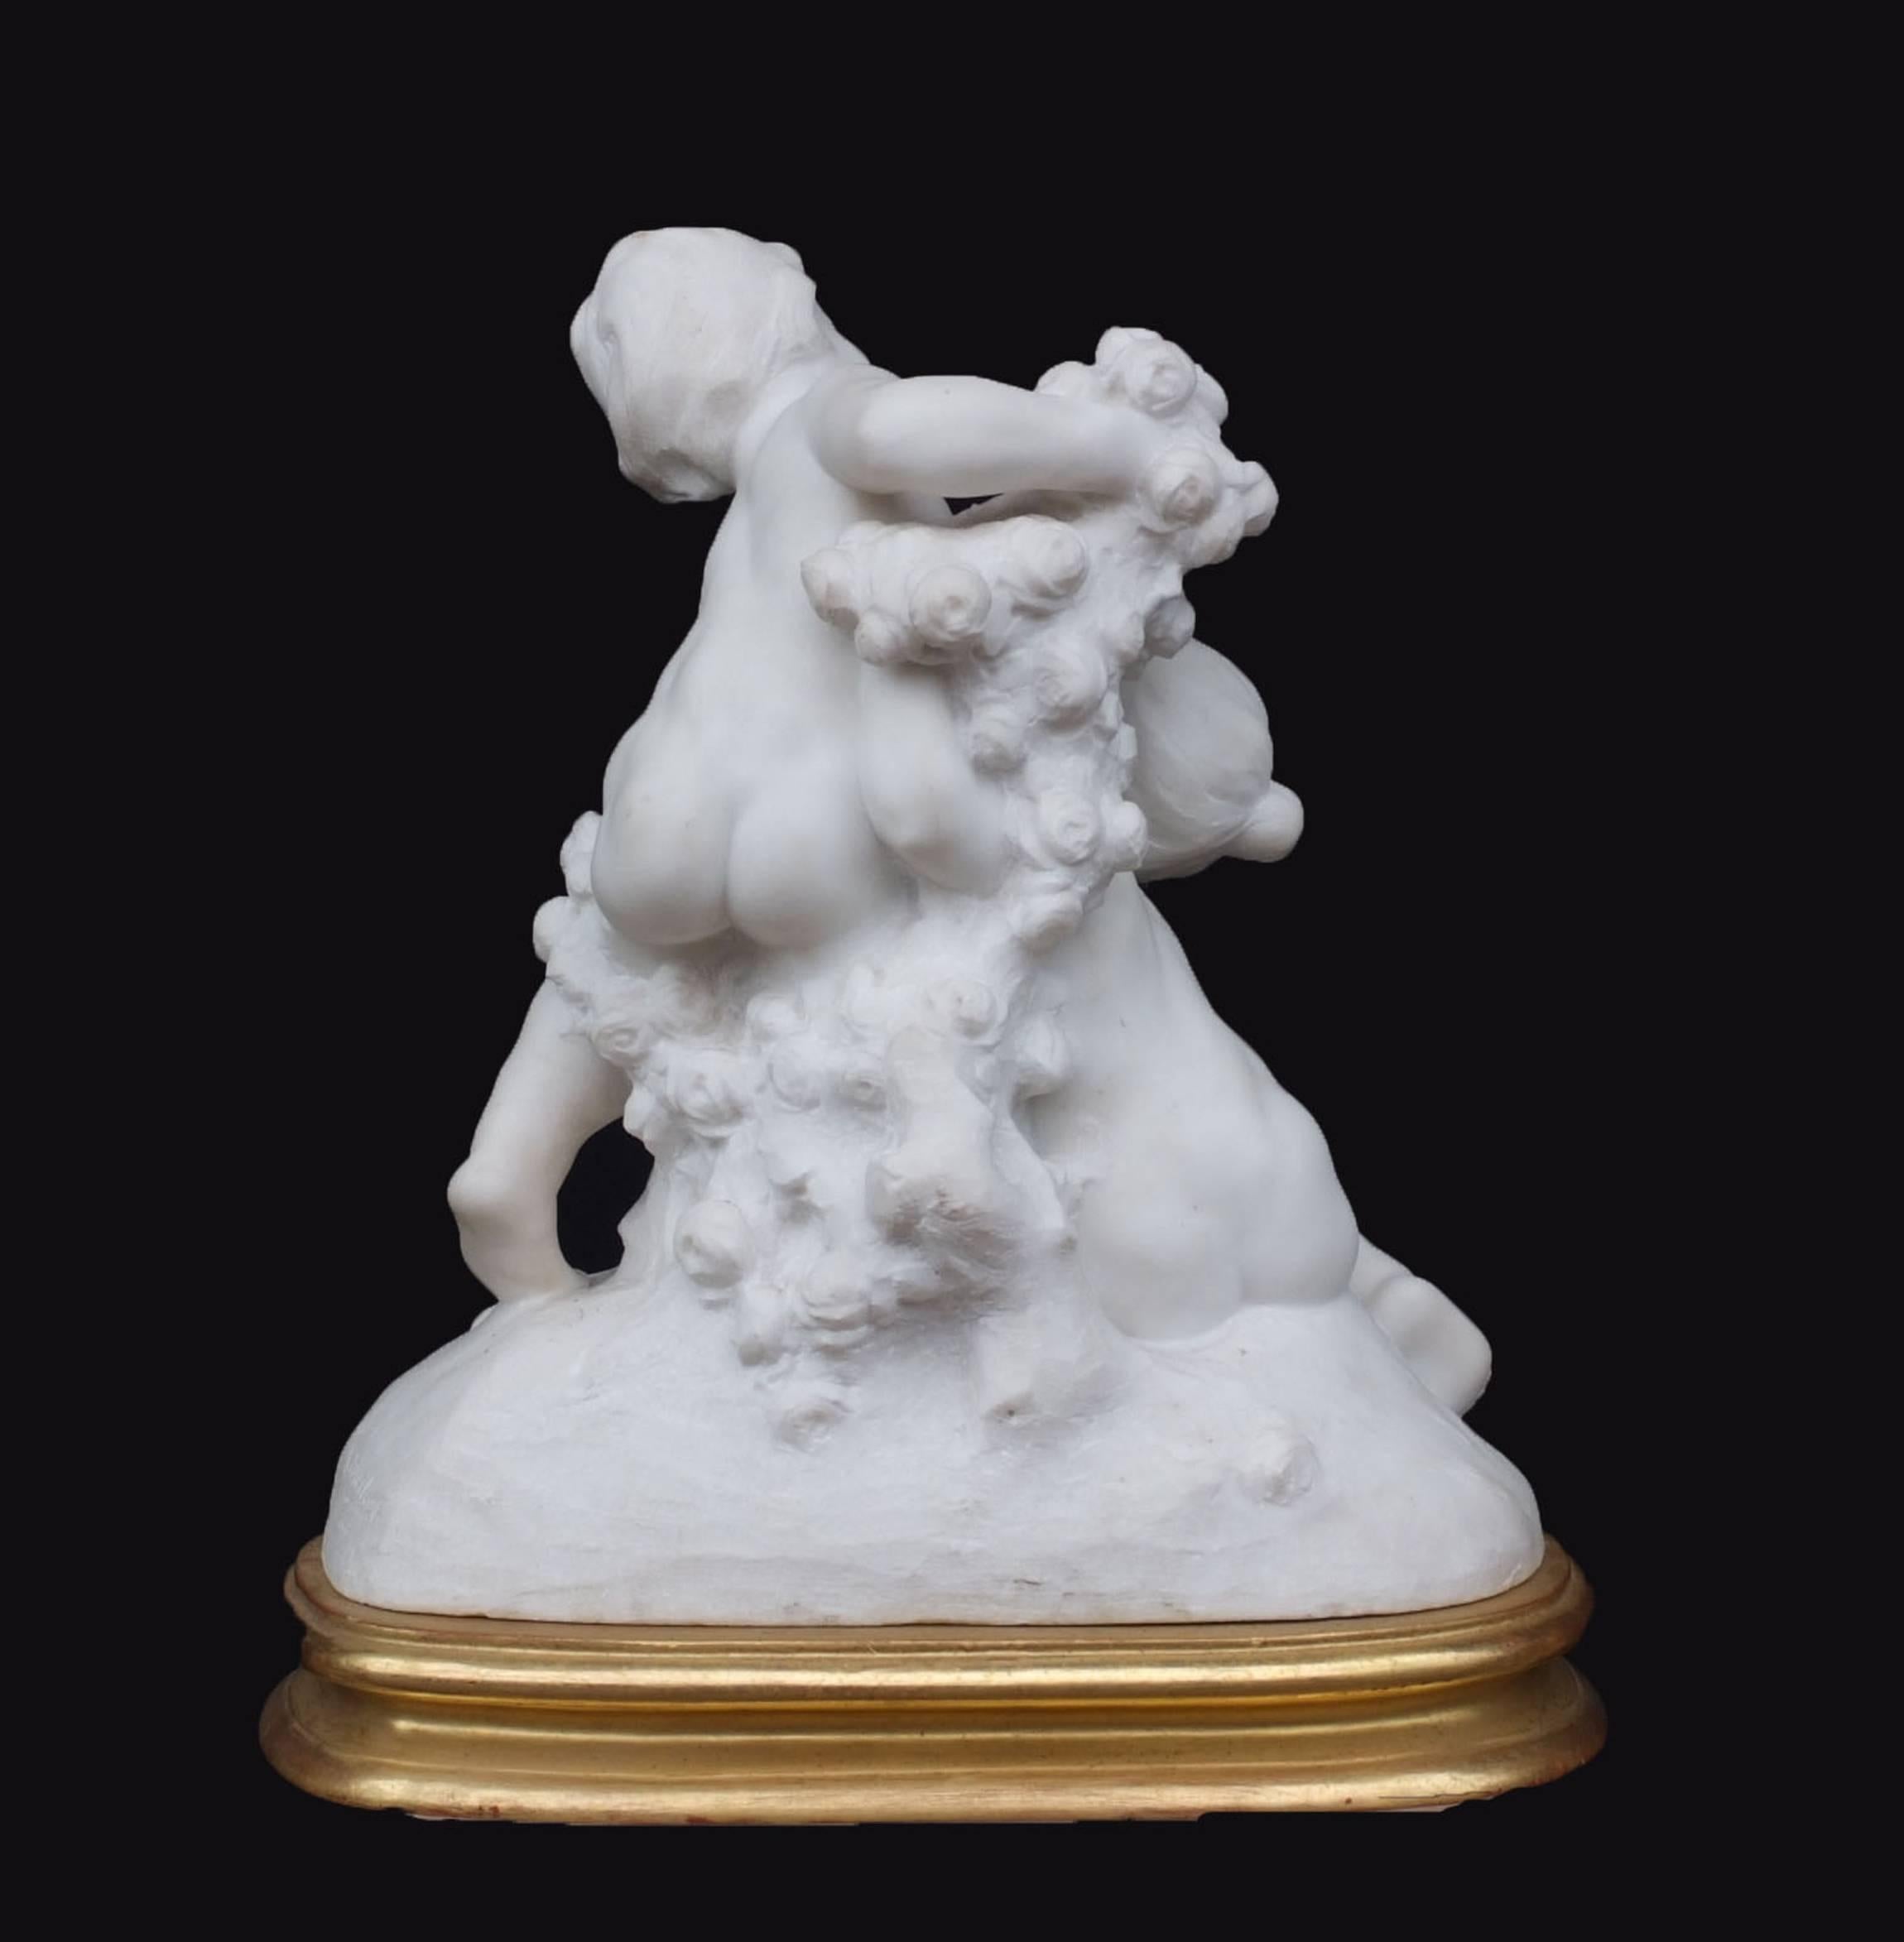 DESCATOIRE Alexandre (1874-1949)
Direct marble sculpture with size
Subject: Cherubs with roses
Signature engraved in the marble low right side A.Descatoire 
Base : wood gilded with leaves
Dimensions with base: H50cm X L 43cm X D25cm
Height of base: